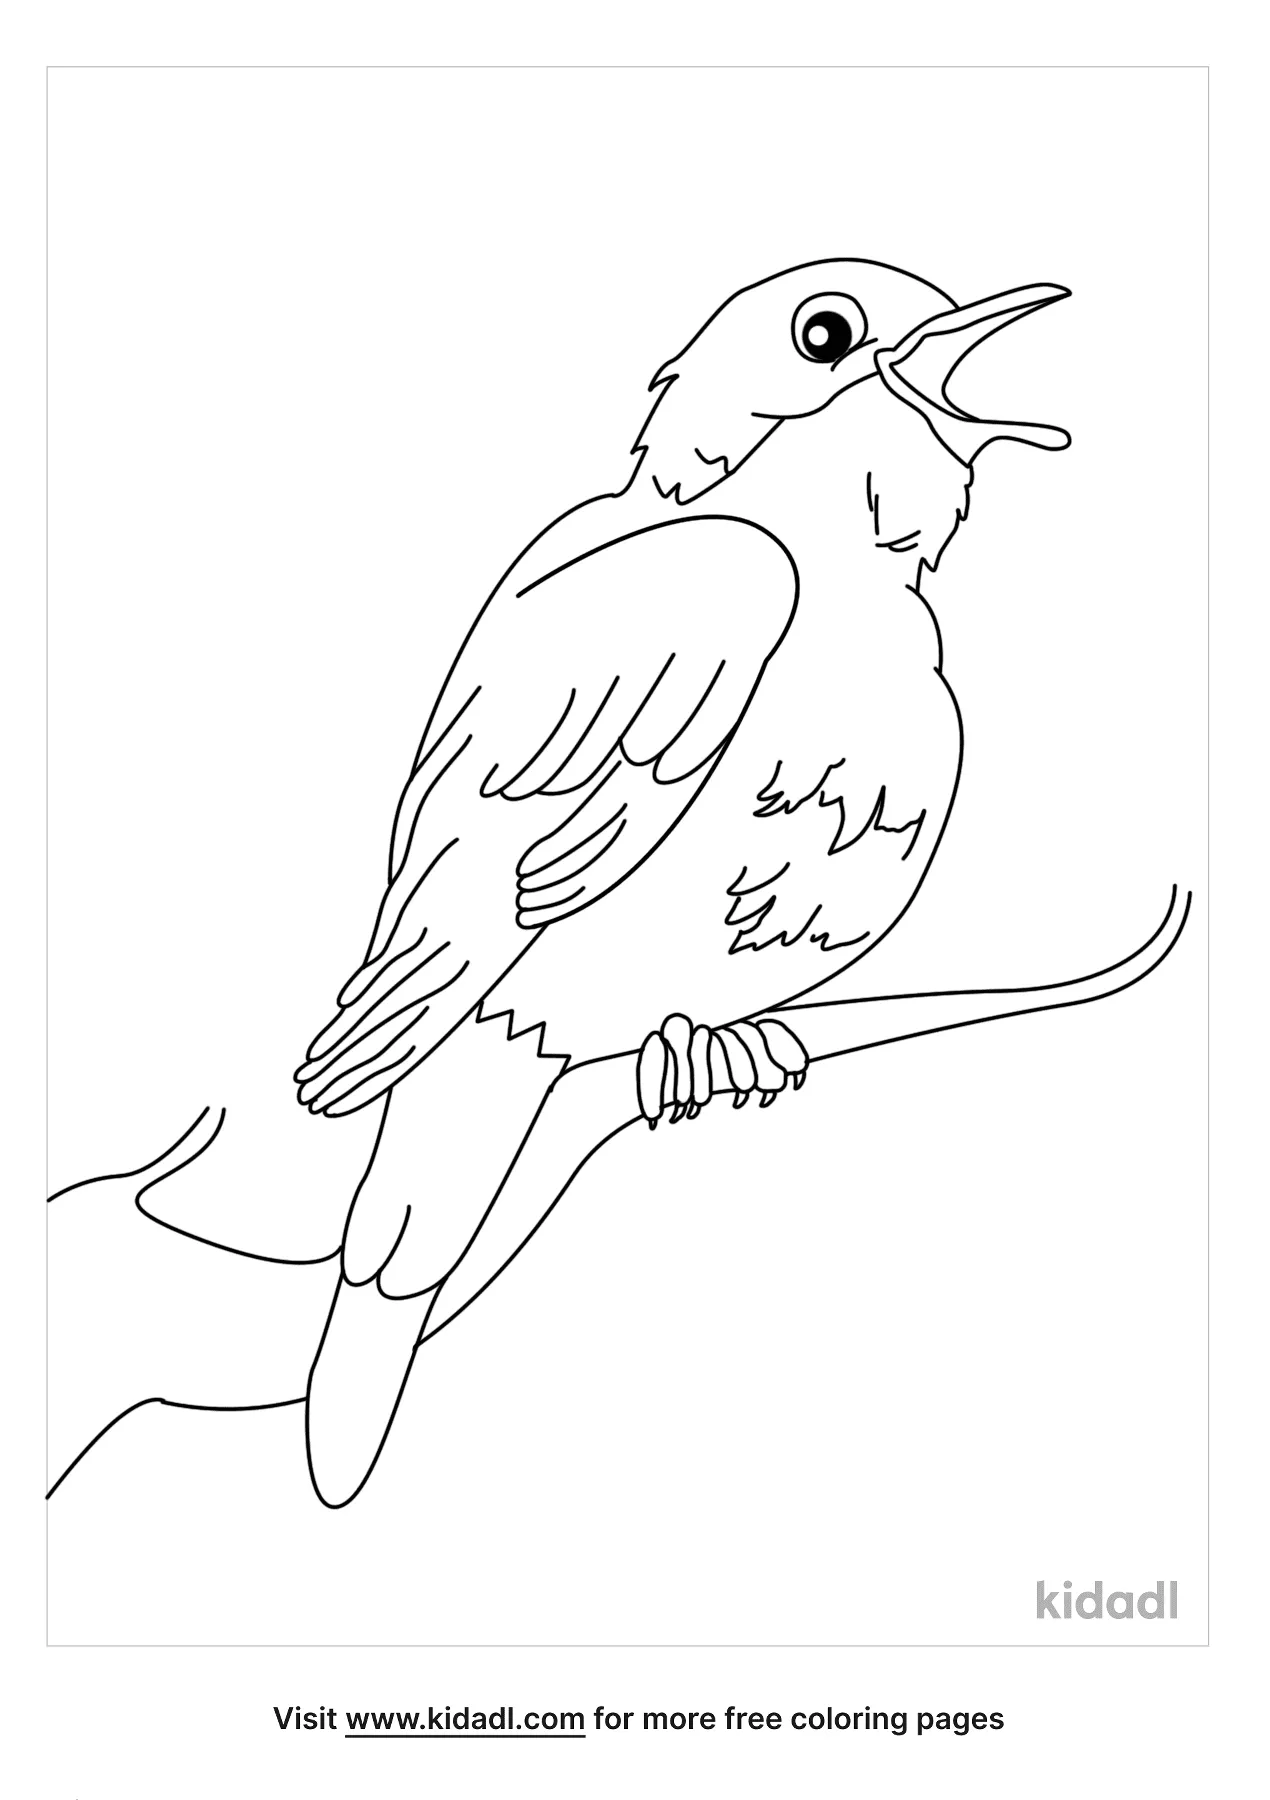 Free nightingale coloring page coloring page printables